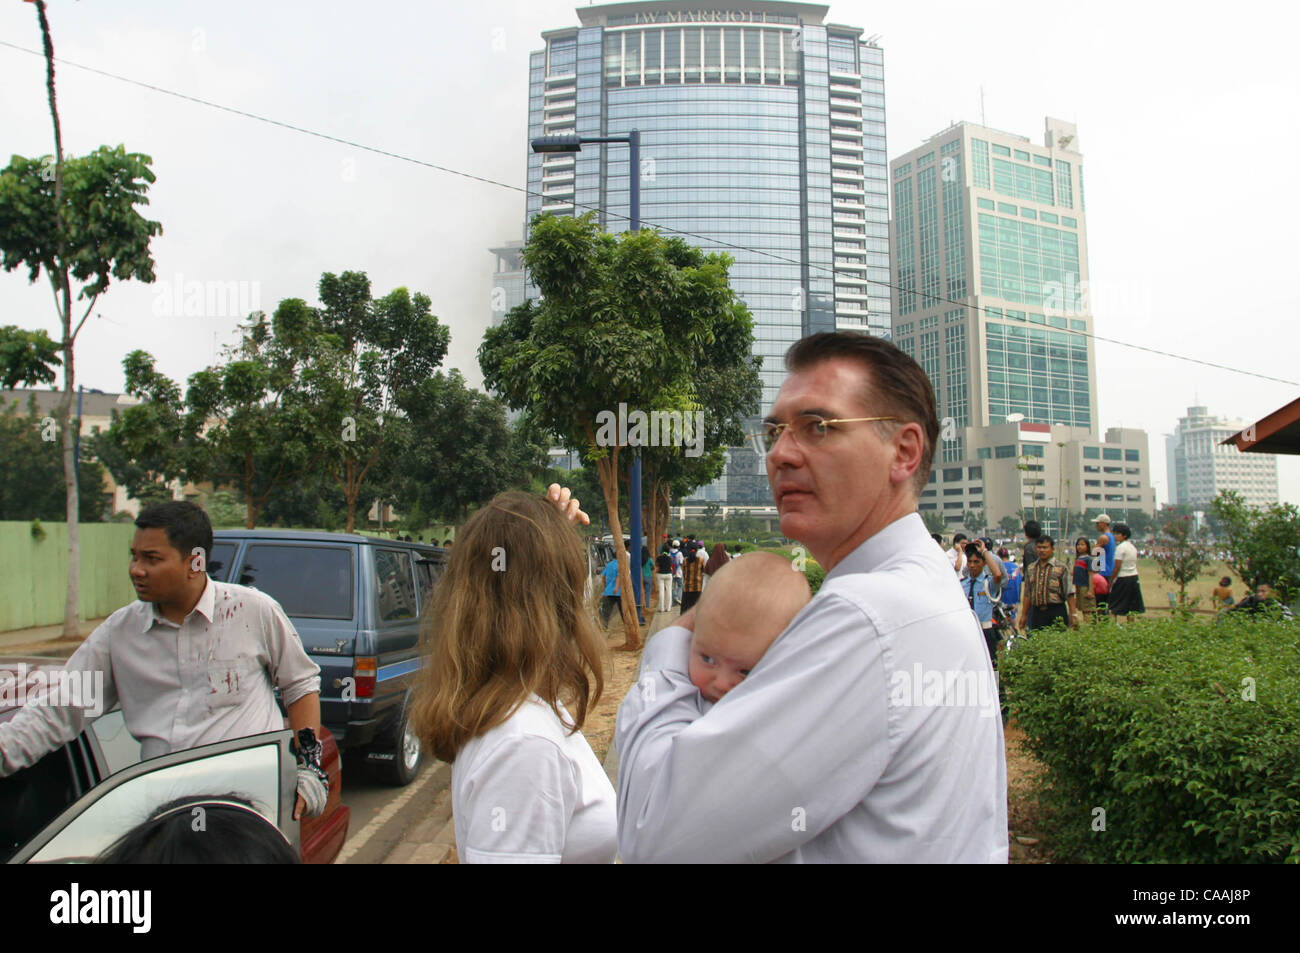 Aug 05, 2003; Jakarta, DKI, Indonesia; An explosion occur at JW Marriott Hotel in downtown Jakarta, killing 14, wounding 100 and damaging nearby buildings. A cell phone detonated a bomb, located in a Toyota Kijang van.  The terrorism bombing happened 2 days before the verdict for Bali bomber Amrozi. Stock Photo